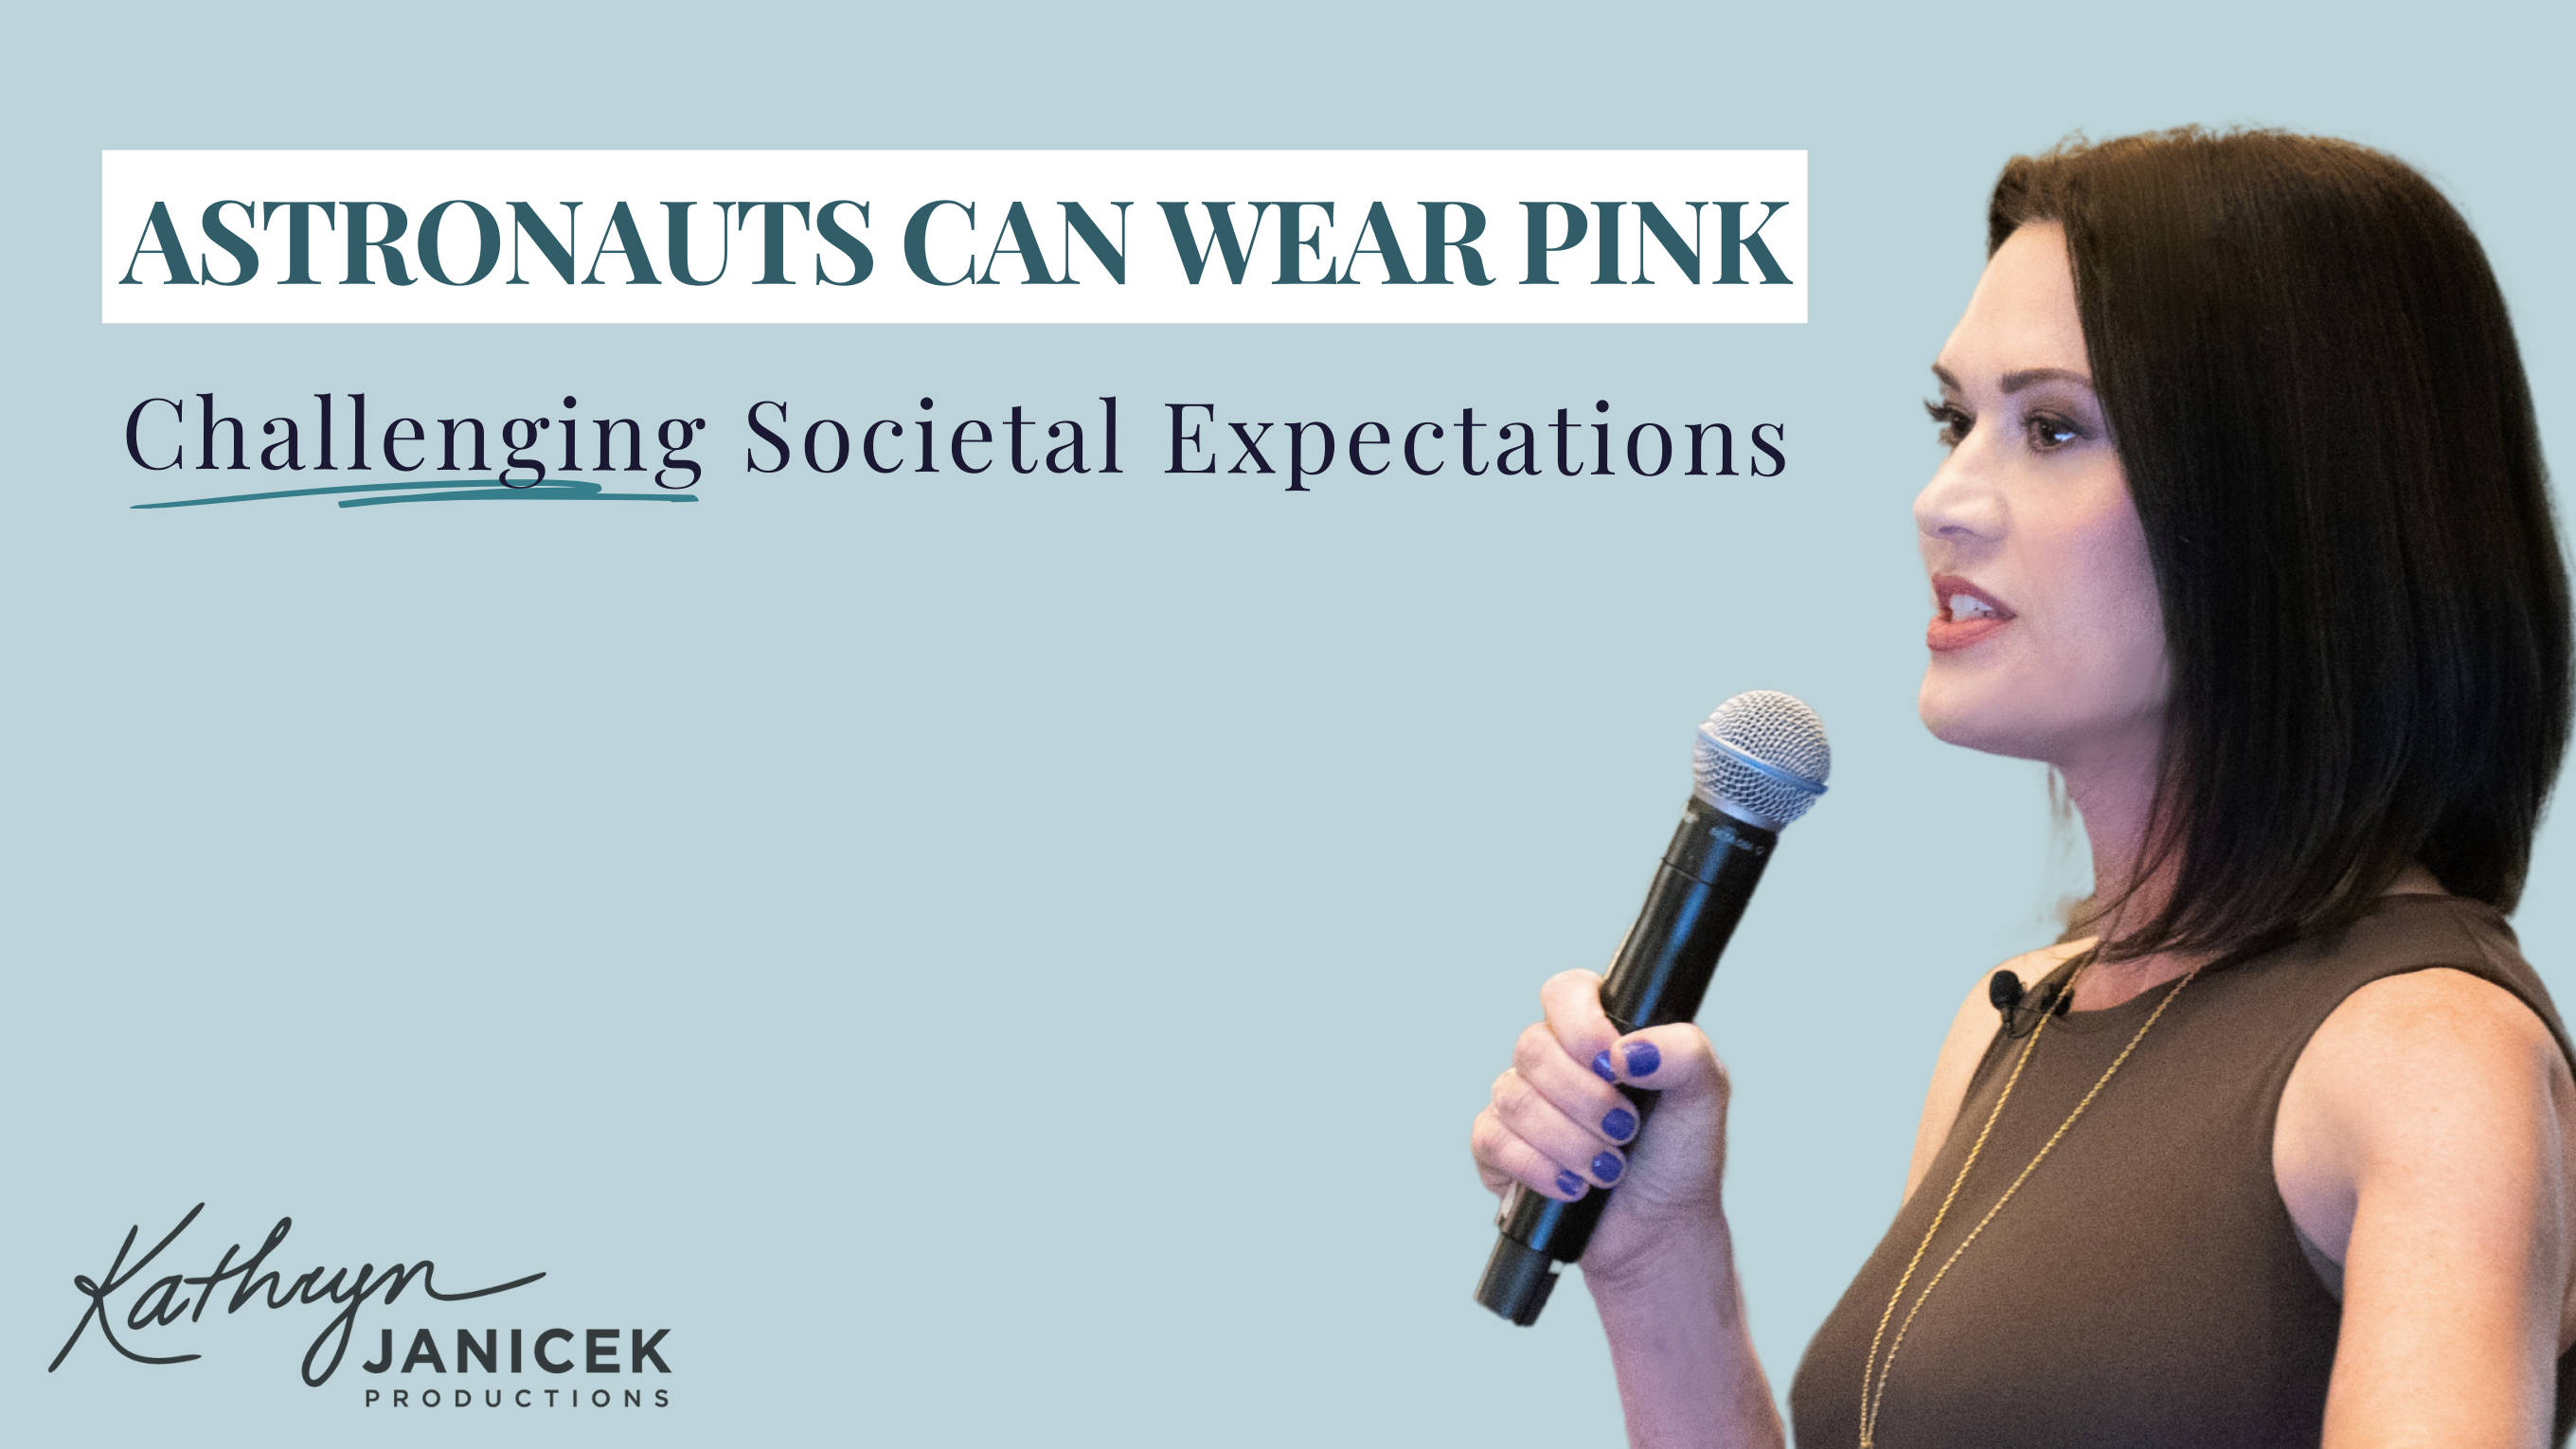 Astronauts Can Wear Pink: Challenging Societal Expectations